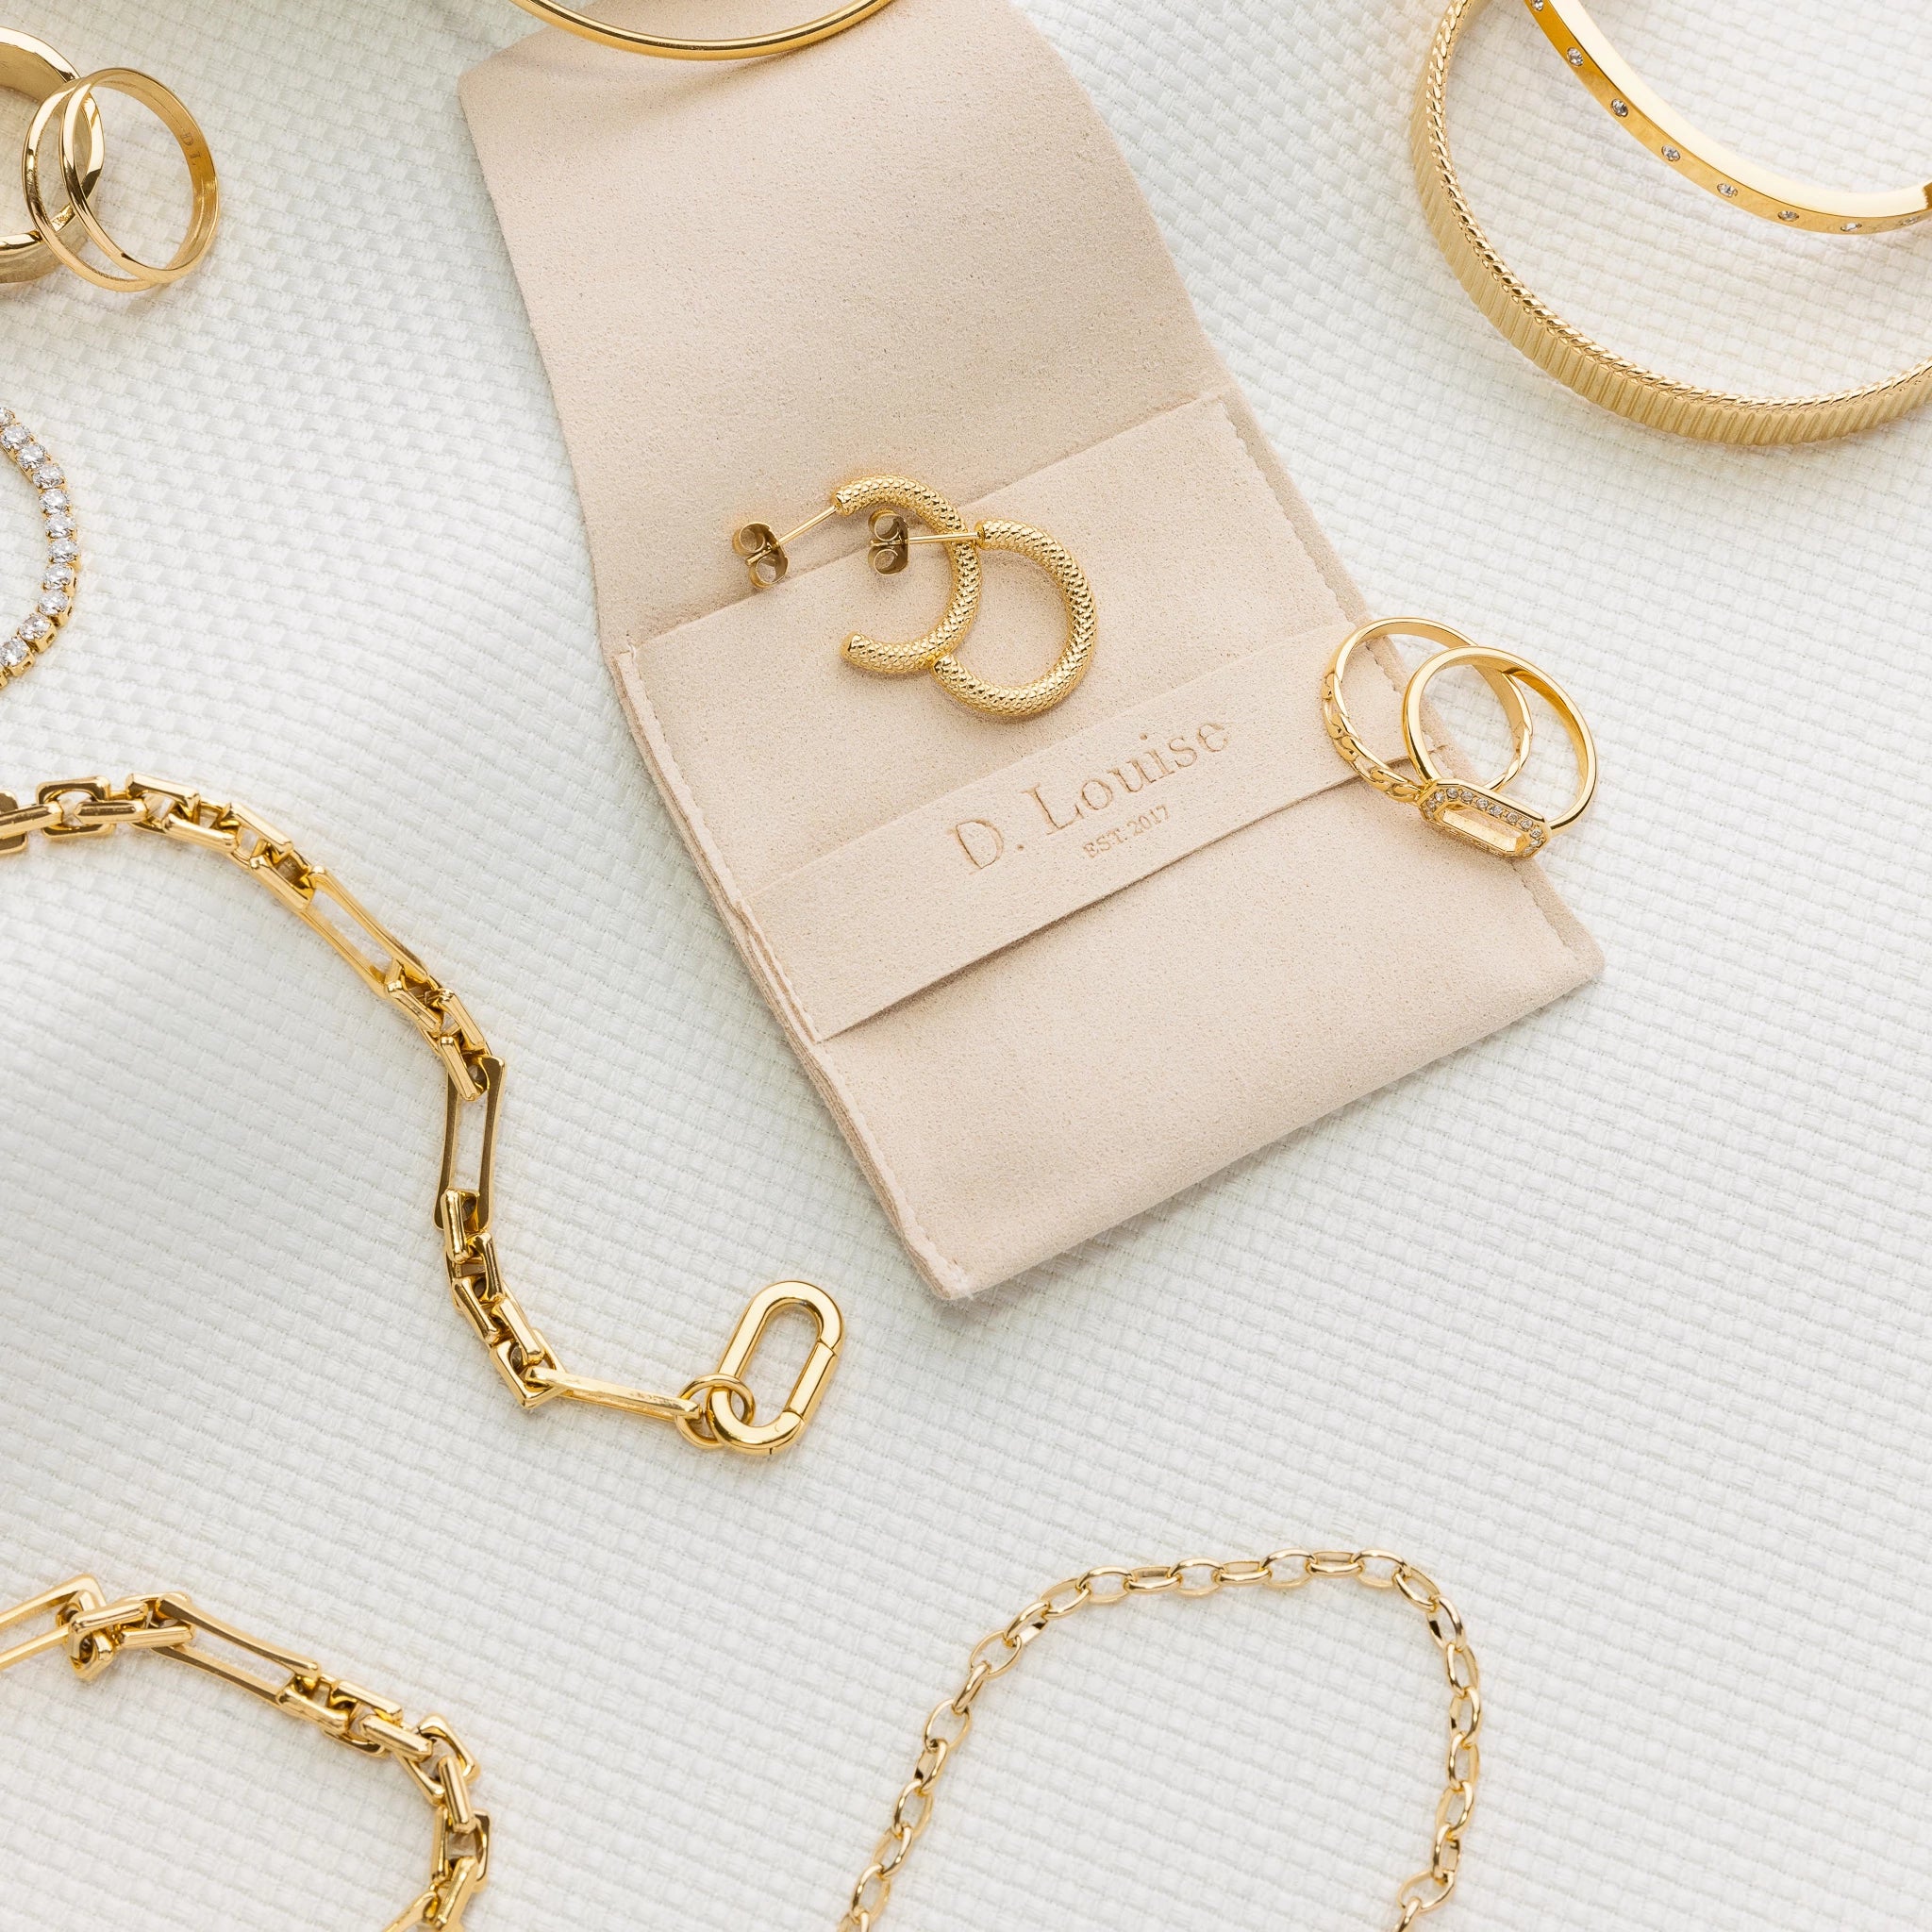 New In – D.Louise Jewellery